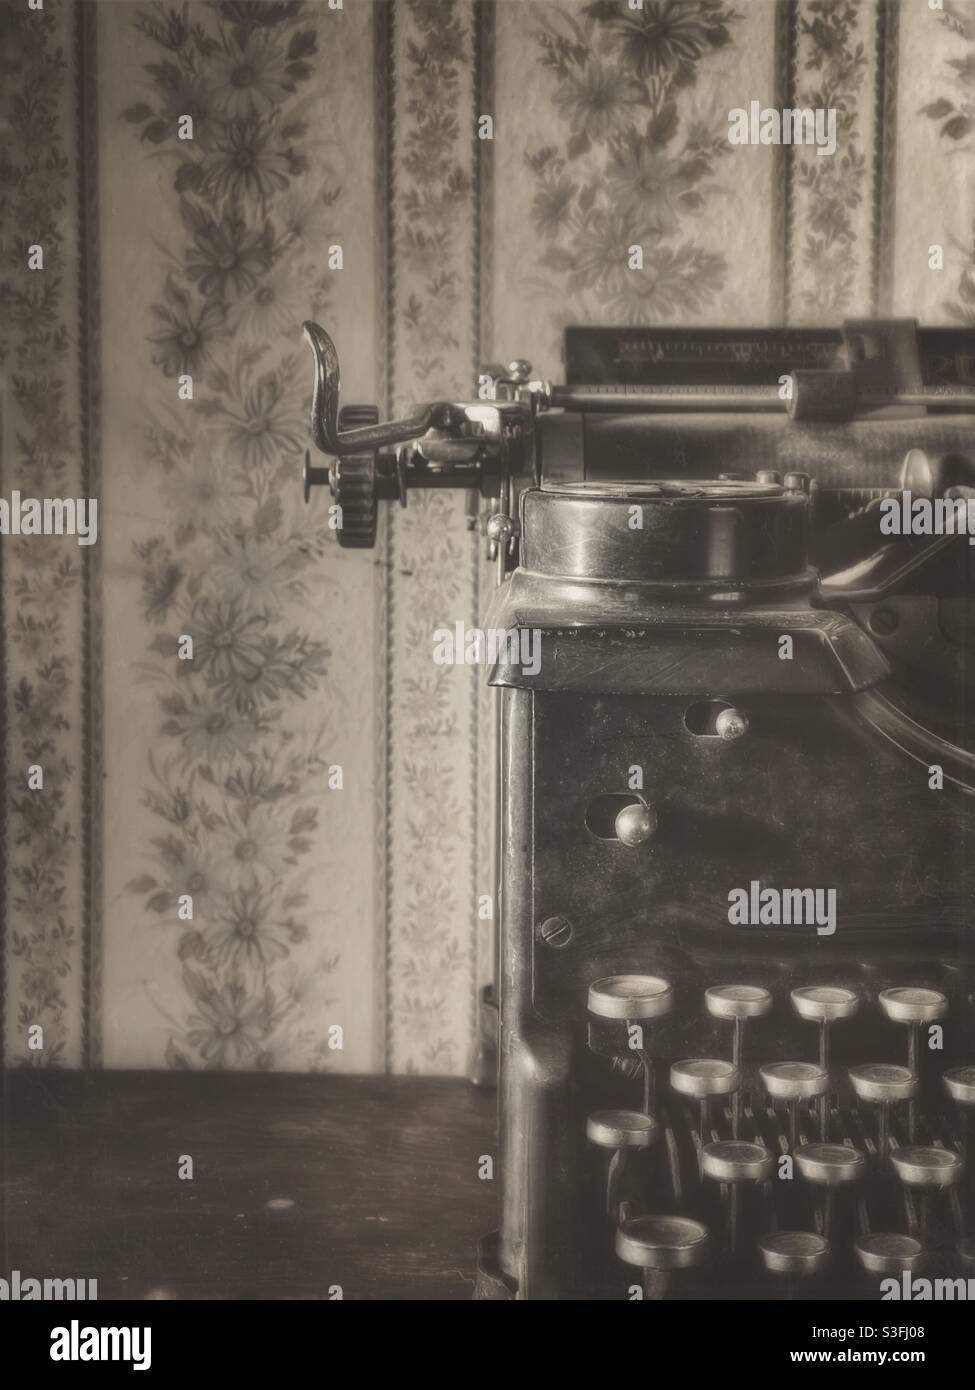 Sepia toned image of a vintage typewriter in front of vintage looking wallpaper Stock Photo